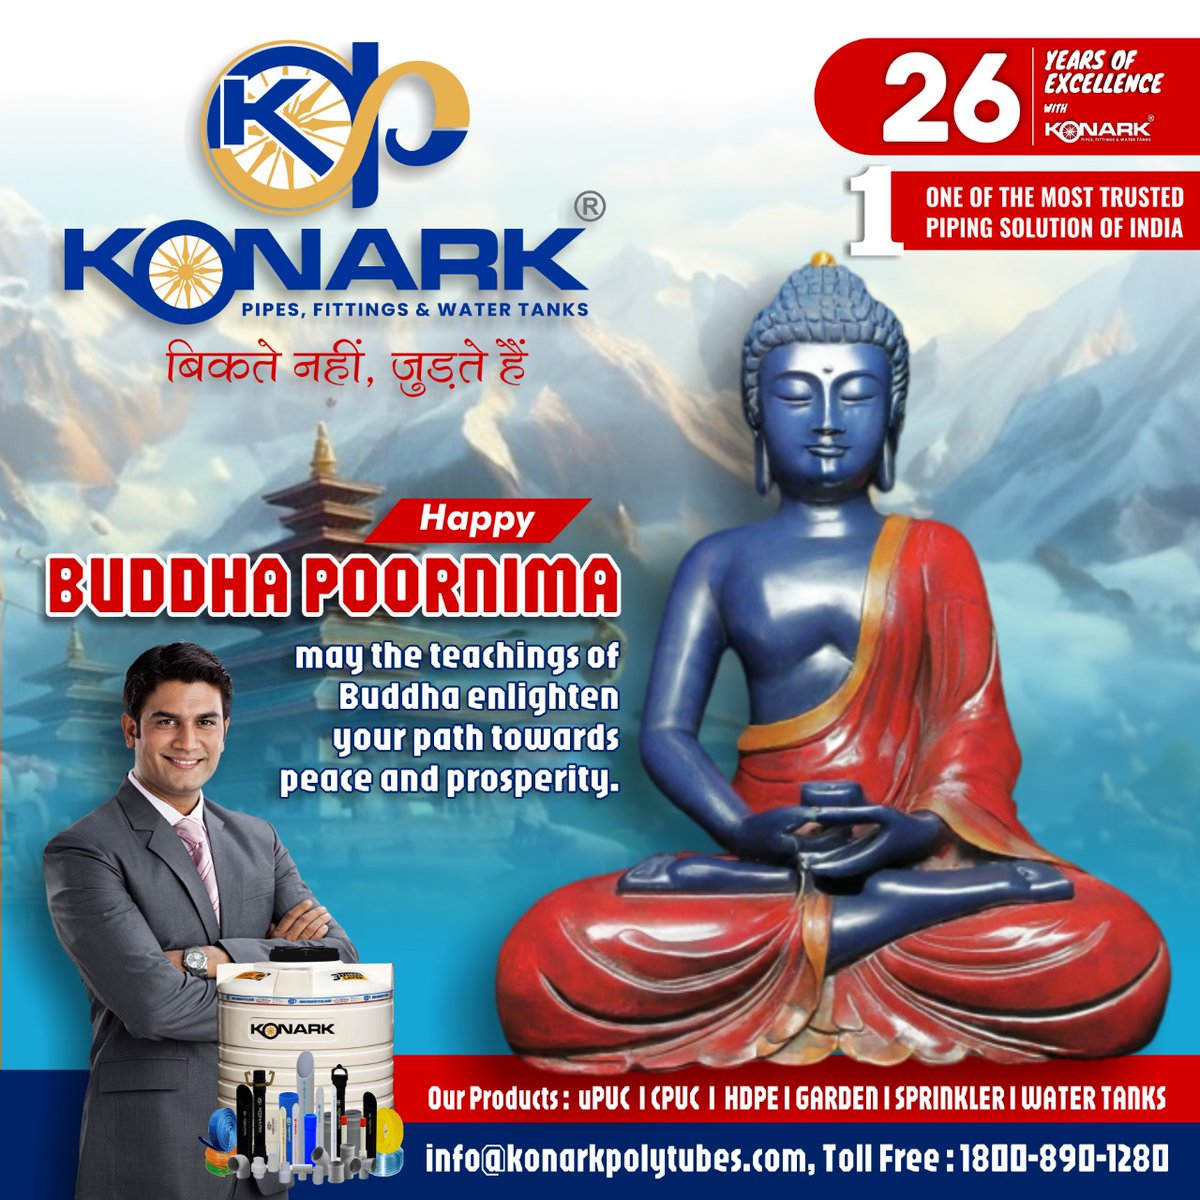 Wishing all a very Buddha Poornima 

Warm wishes for a joyful Buddha Purnima from Konark Pipes! May the light of Buddha Purnima illuminate your path with peace and prosperity.

Feel free to reach out to us at 1800 890 1280.

#BuddhaPurnima #Peace #Enlightenment